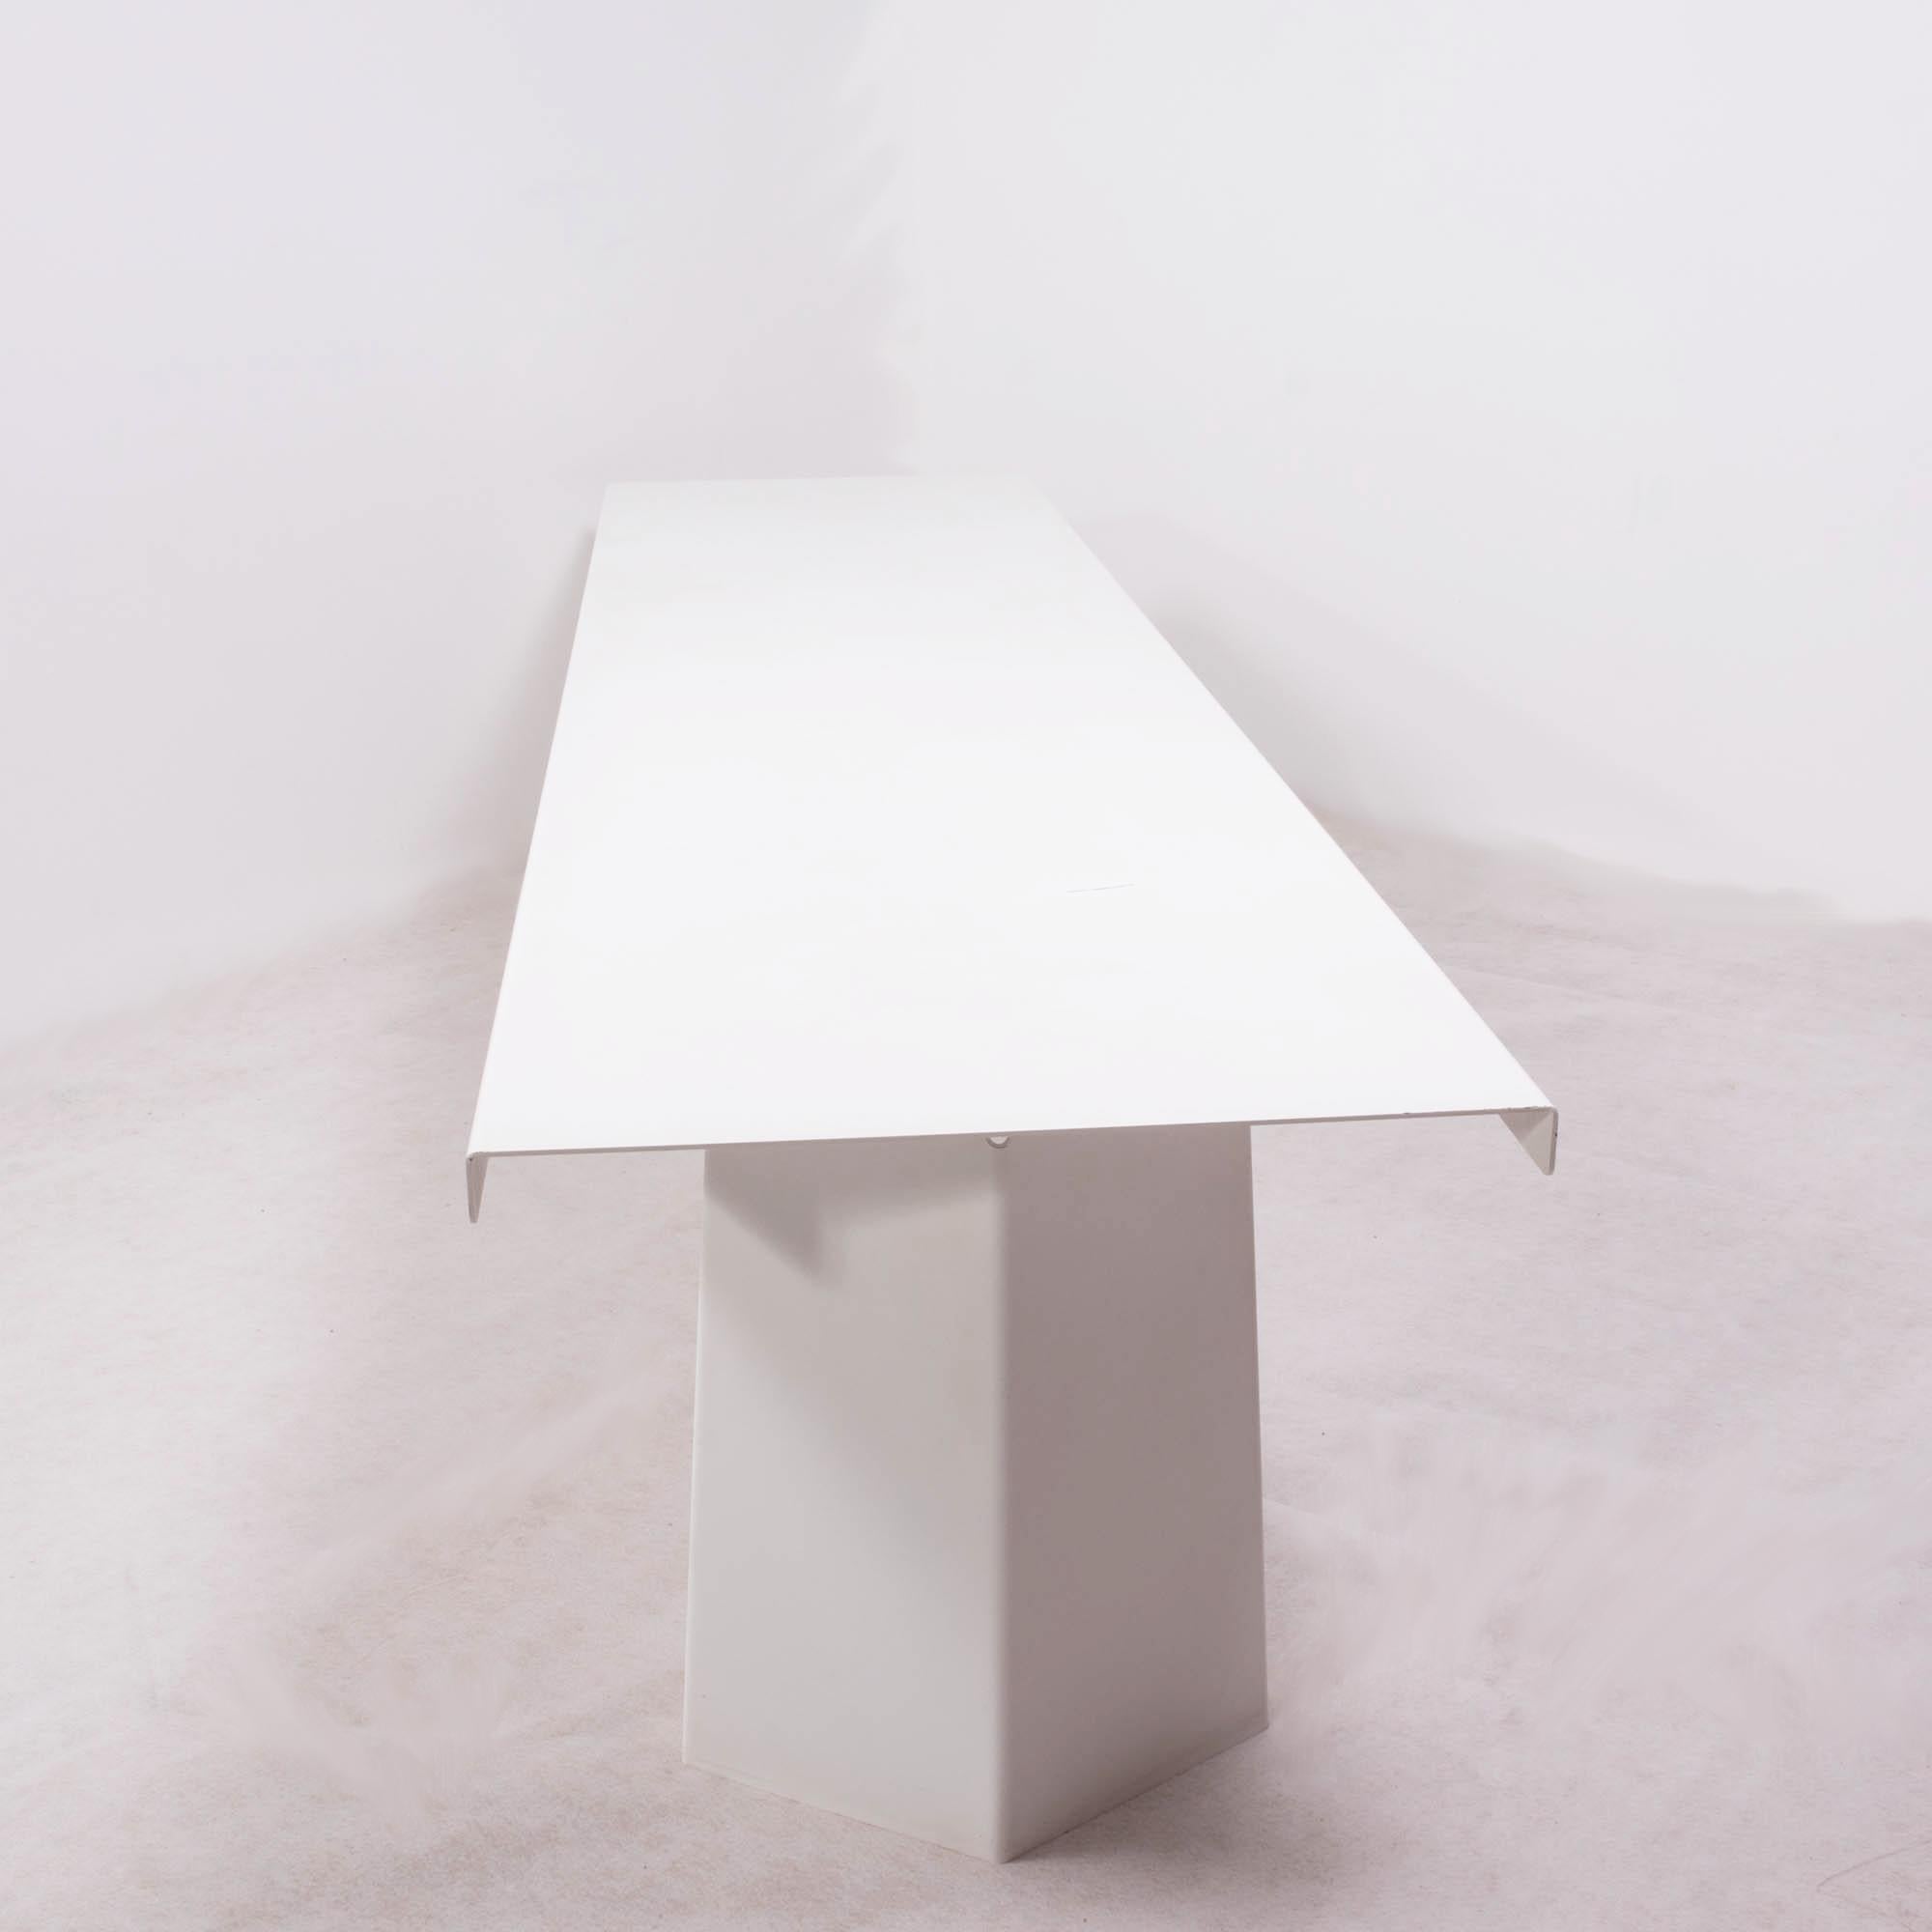 German Modern Industrial White Pallas Dining Table by Konstantin Grcic for ClassiCon